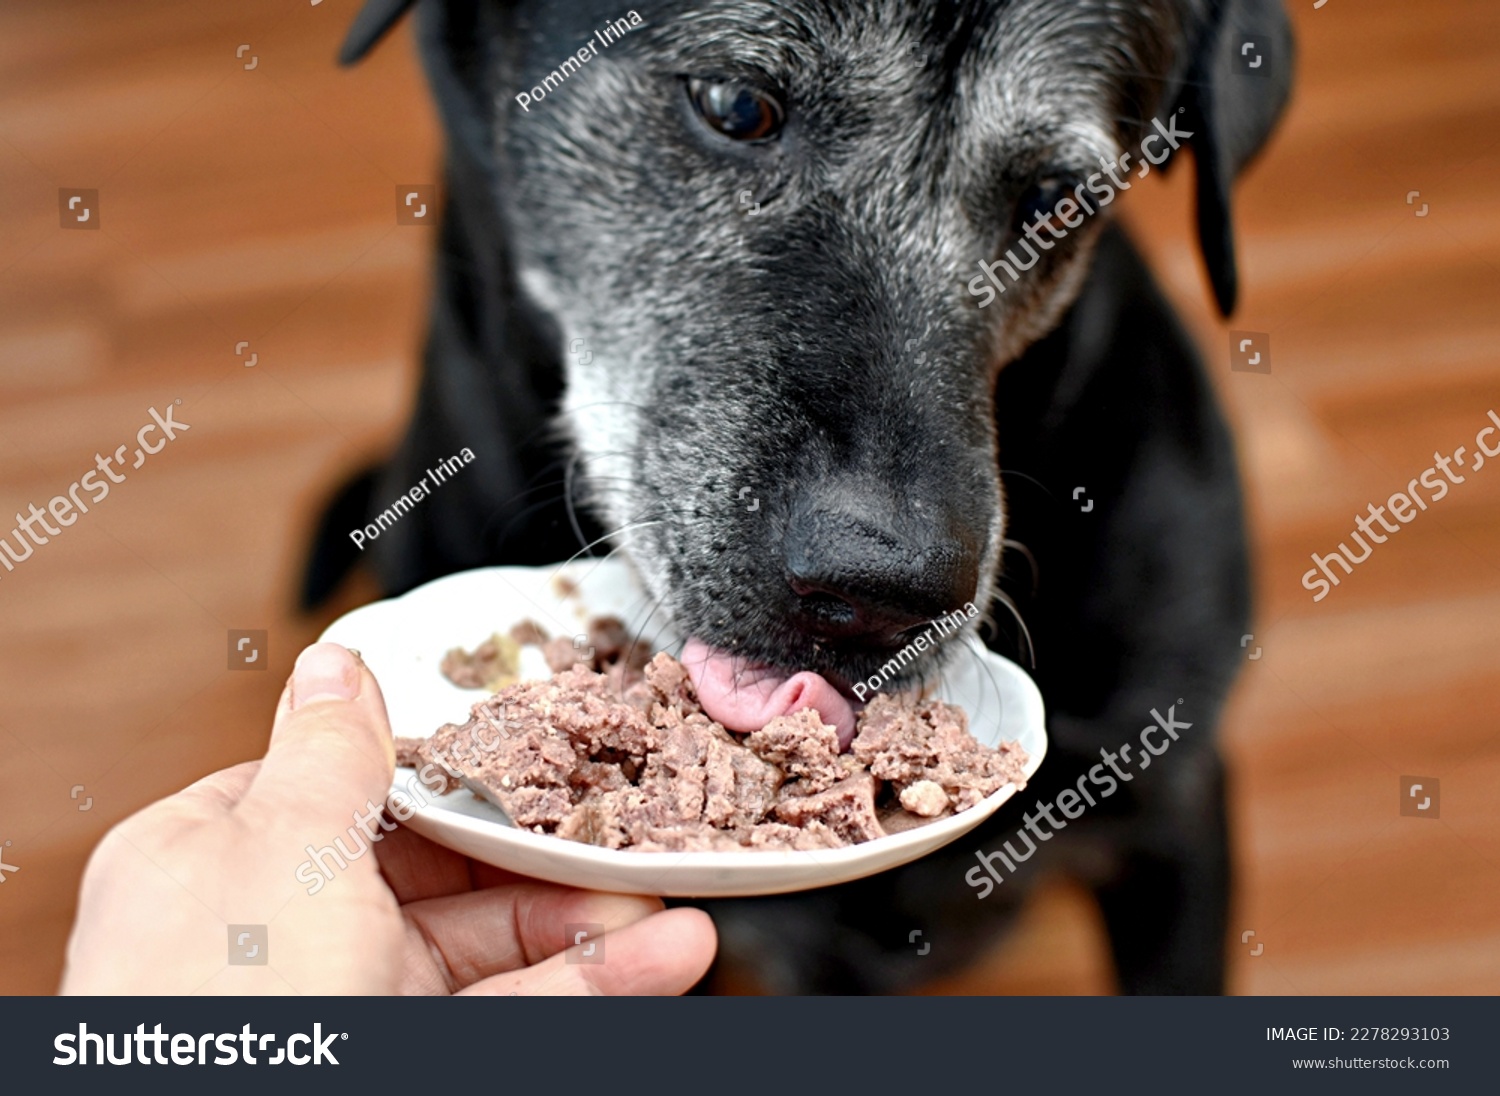 dog eating canned meat from a saucer #2278293103